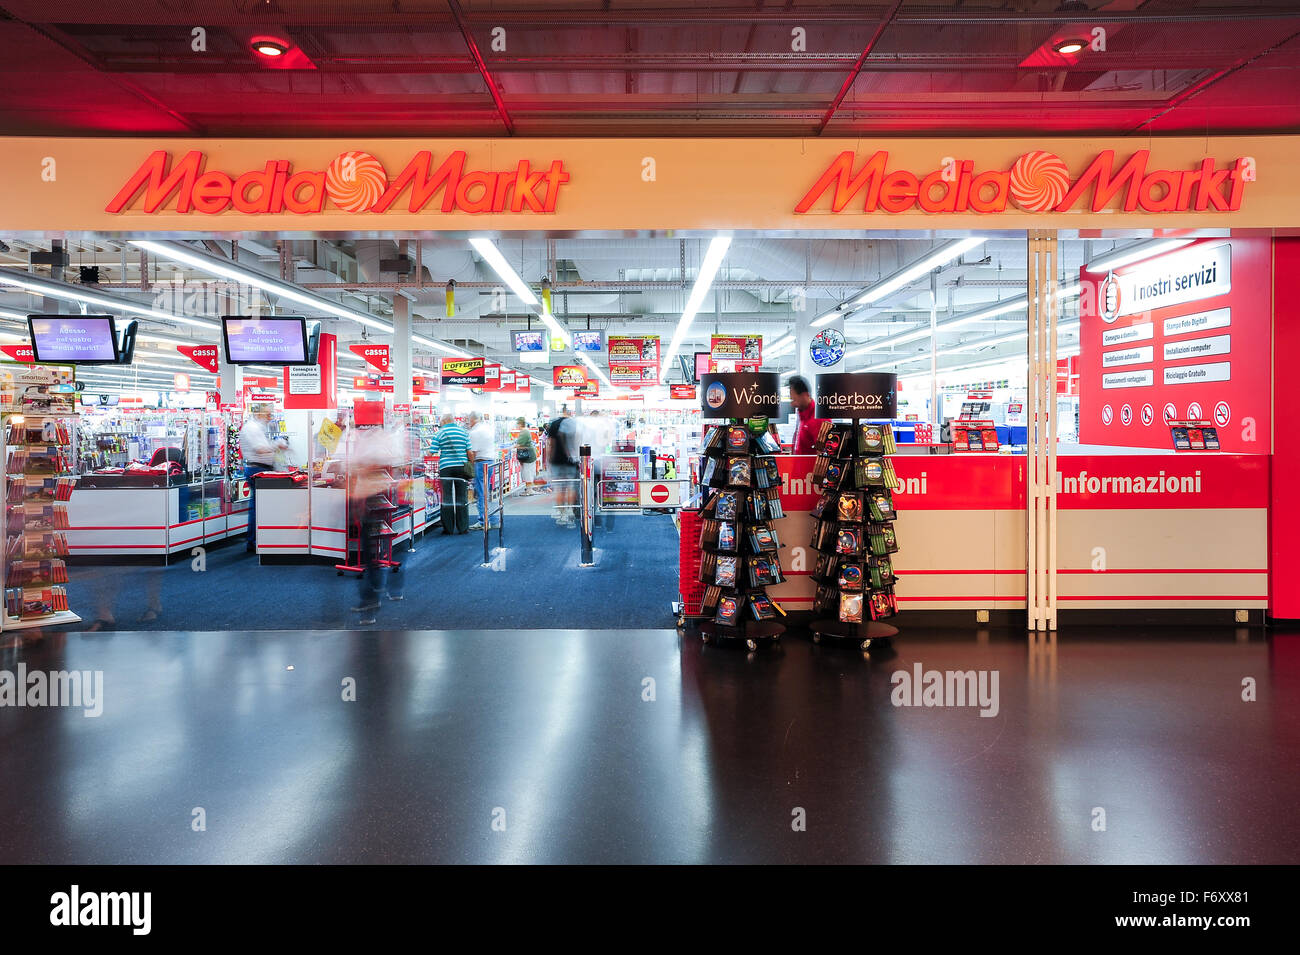 Mediamarkt Amsterdam Arena Consumer Electronics Retail Off Online Shopping  Tv Mobilephone Computer Logo People Infront Of The Store Stock Photo -  Download Image Now - iStock